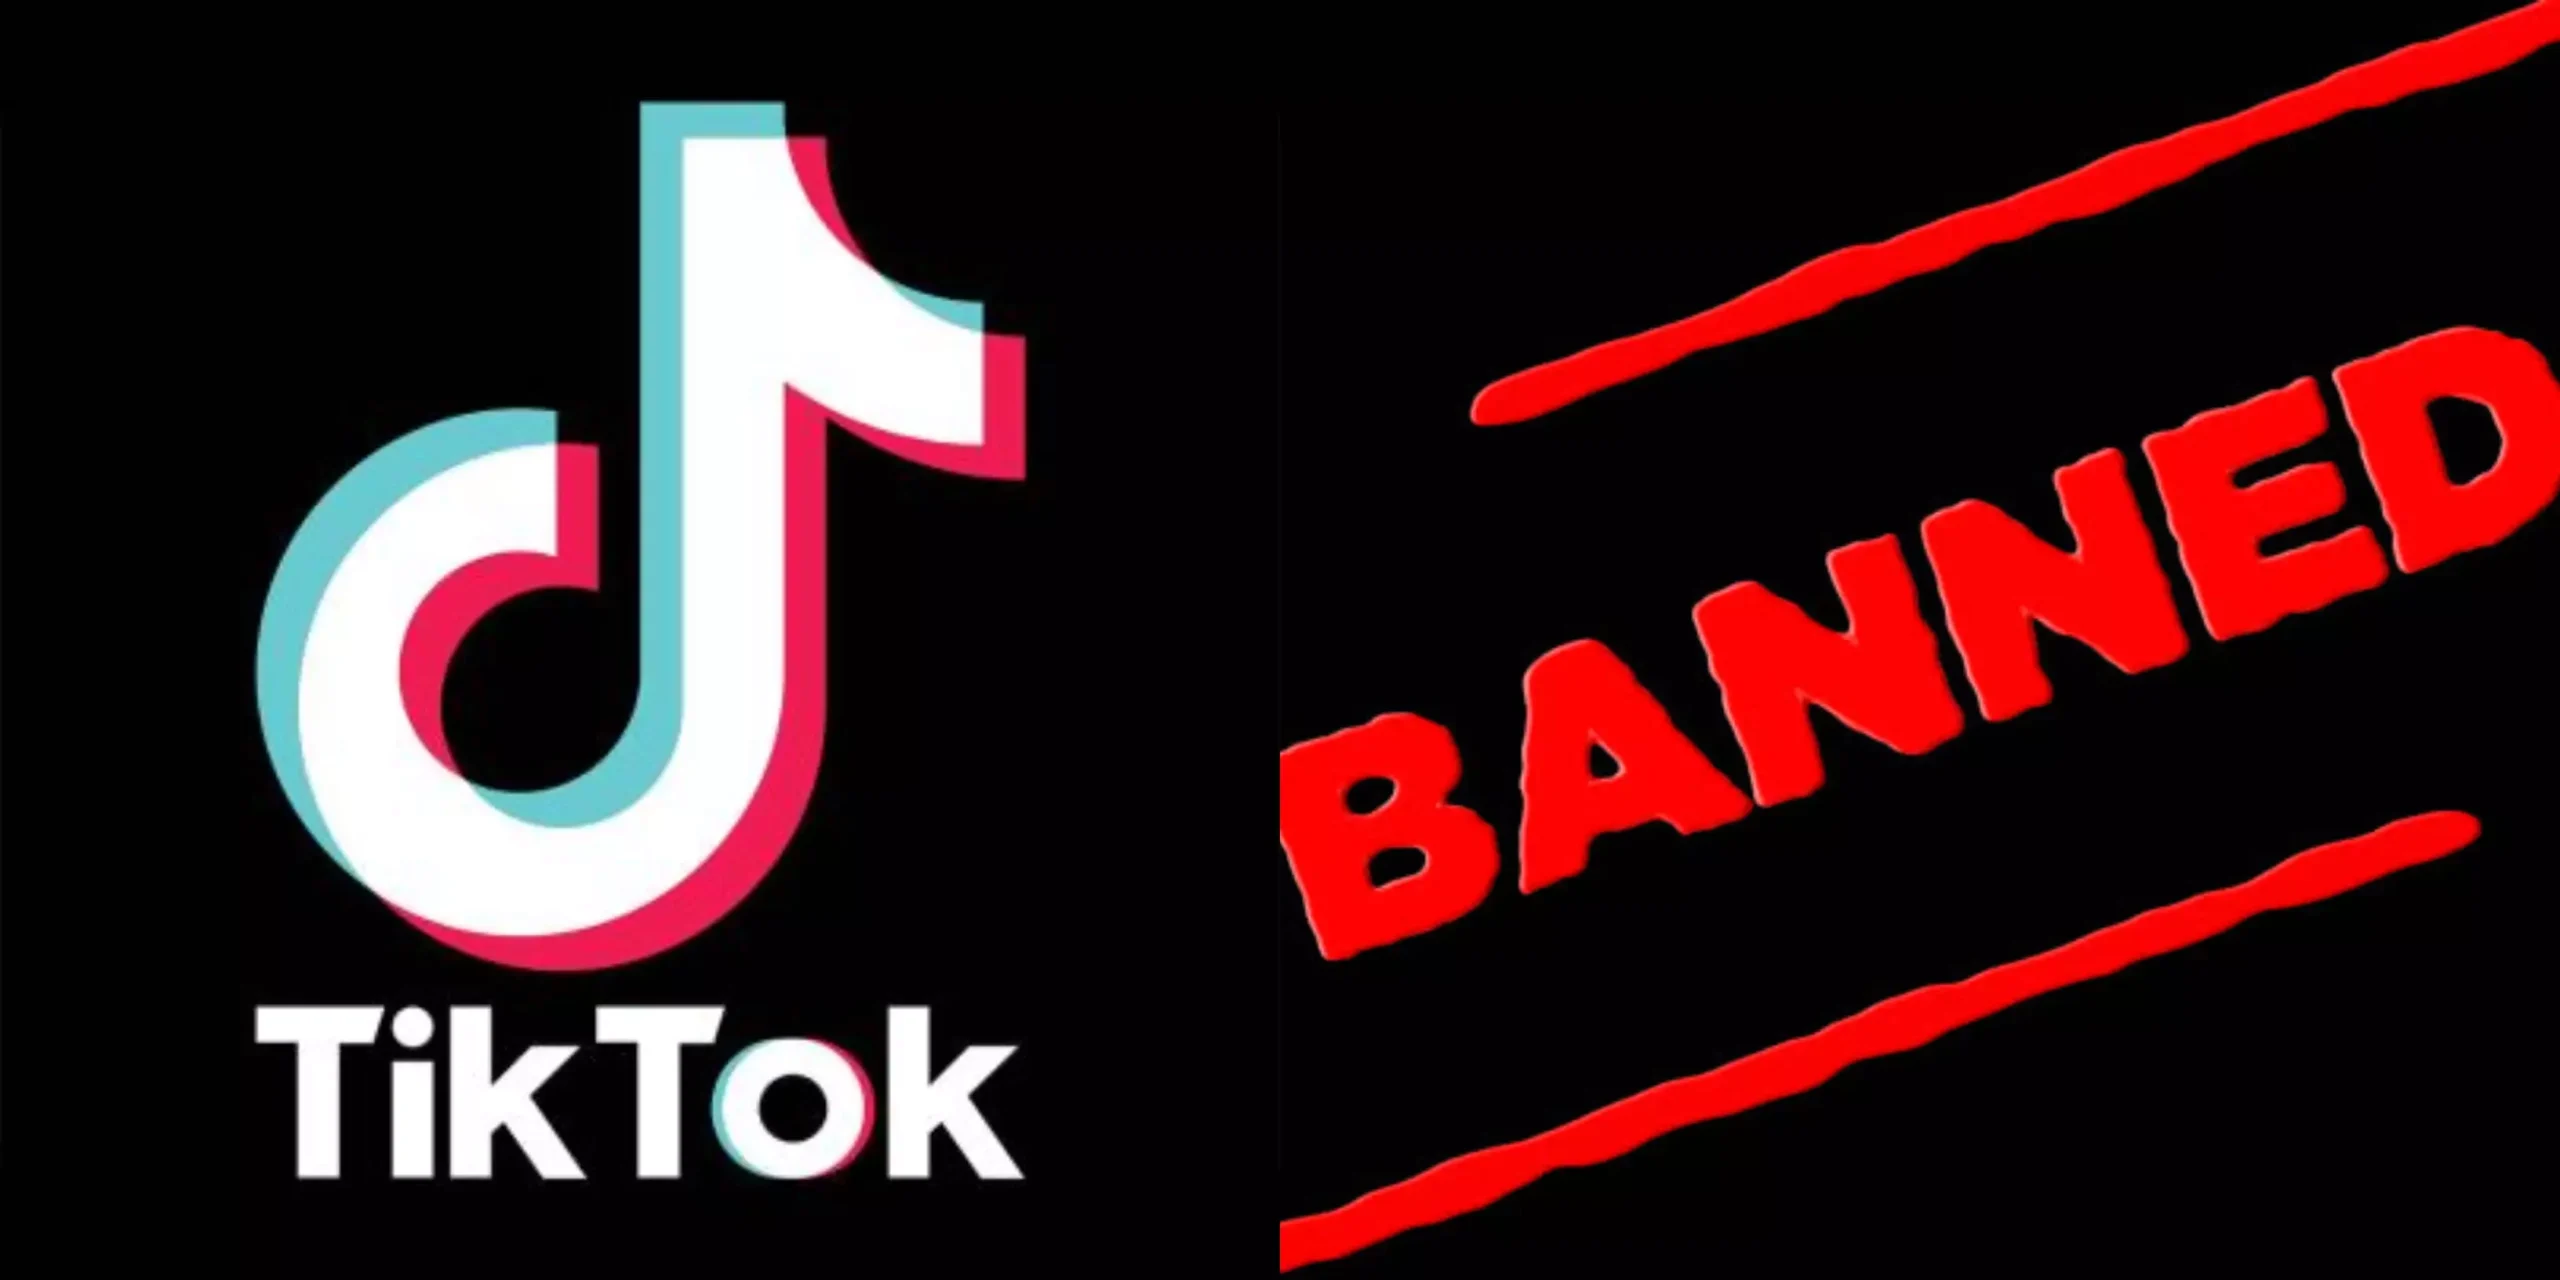 Indonesia’s Stance on E-commerce Revolution: TikTok Shop Ban Sparks Diverse Opinions